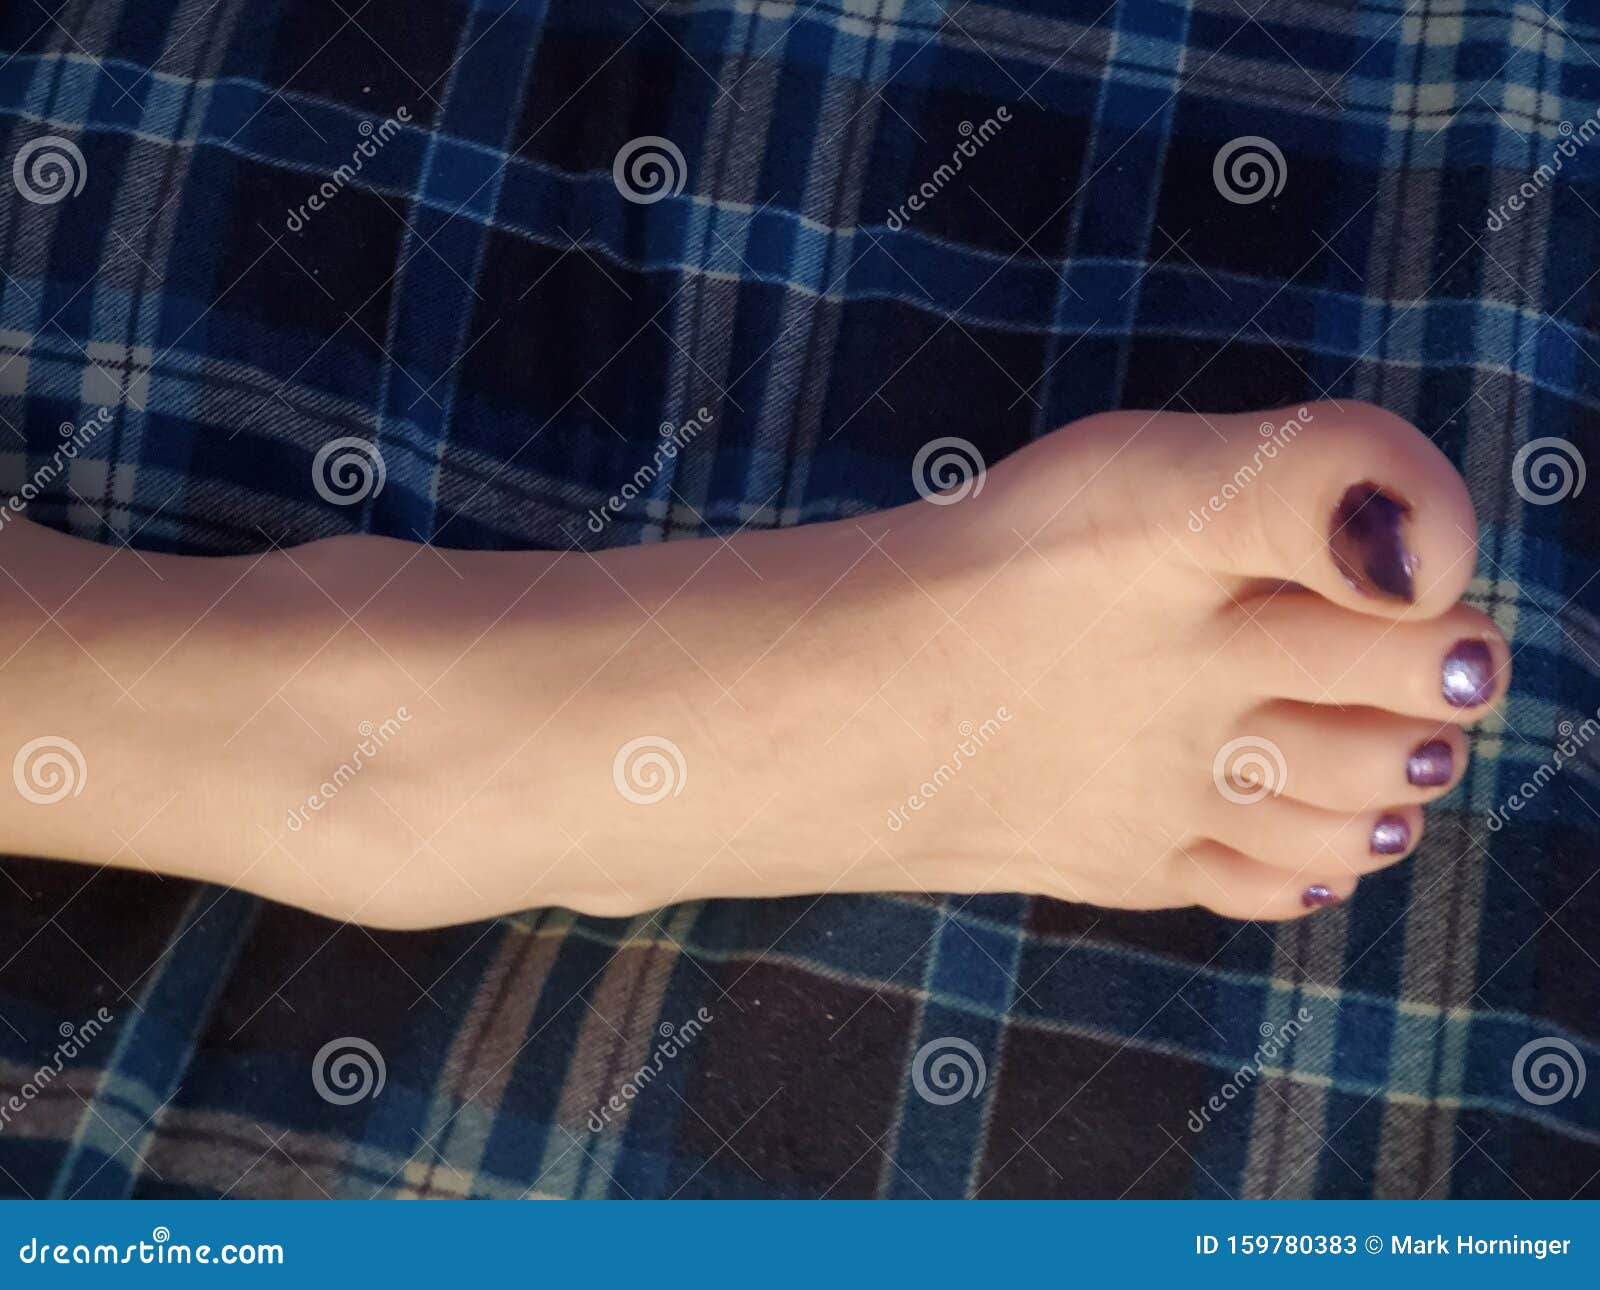 Sexy feet pictures